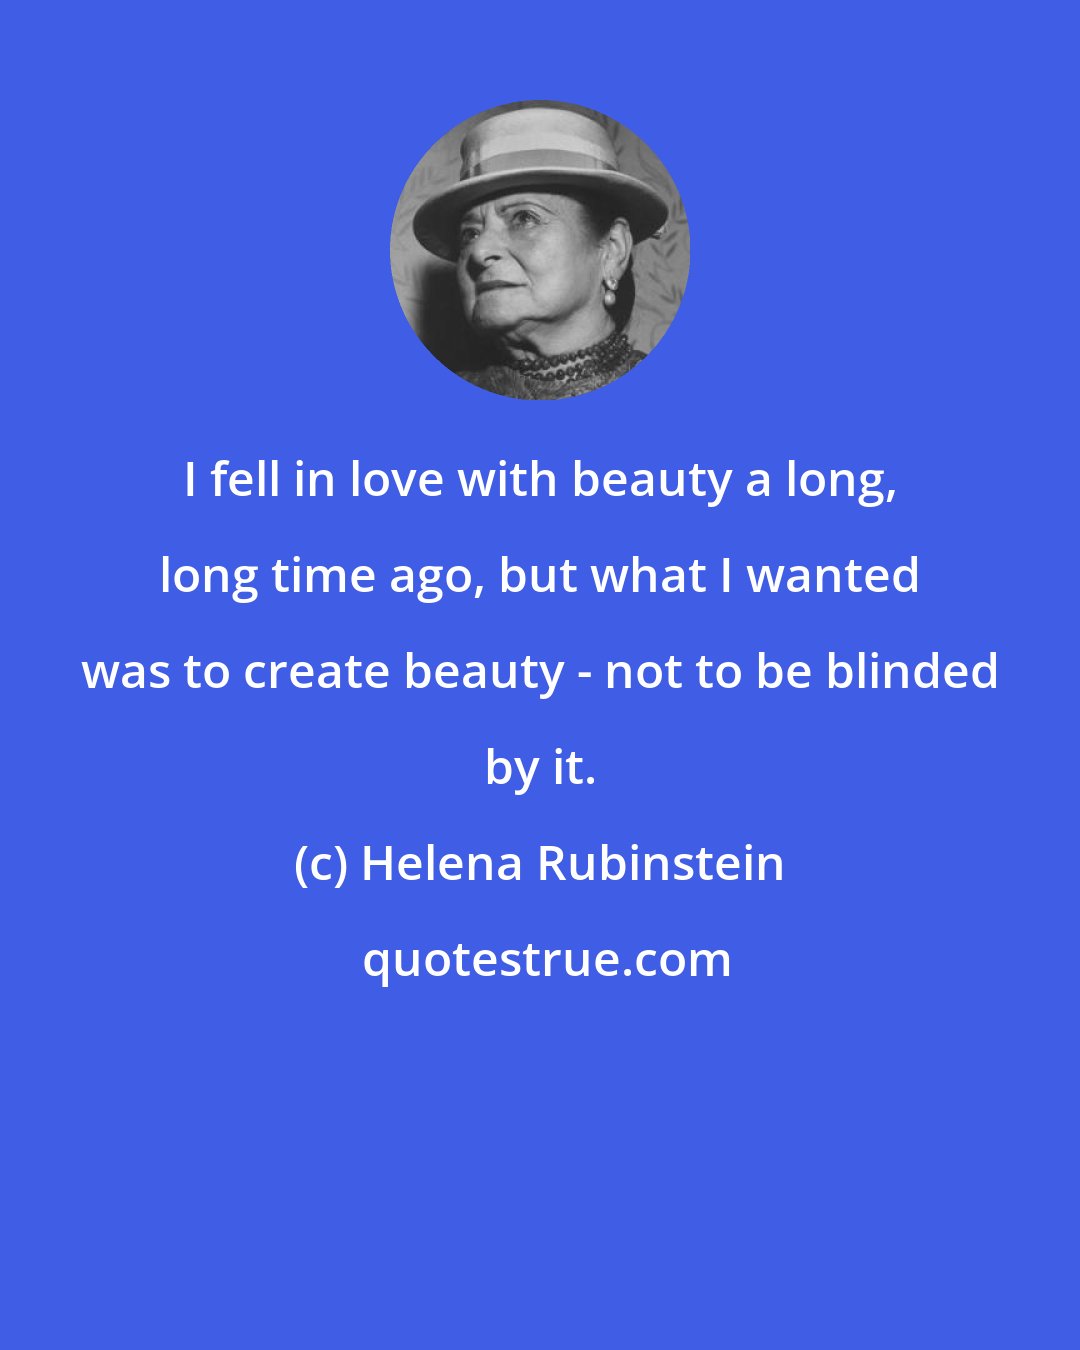 Helena Rubinstein: I fell in love with beauty a long, long time ago, but what I wanted was to create beauty - not to be blinded by it.